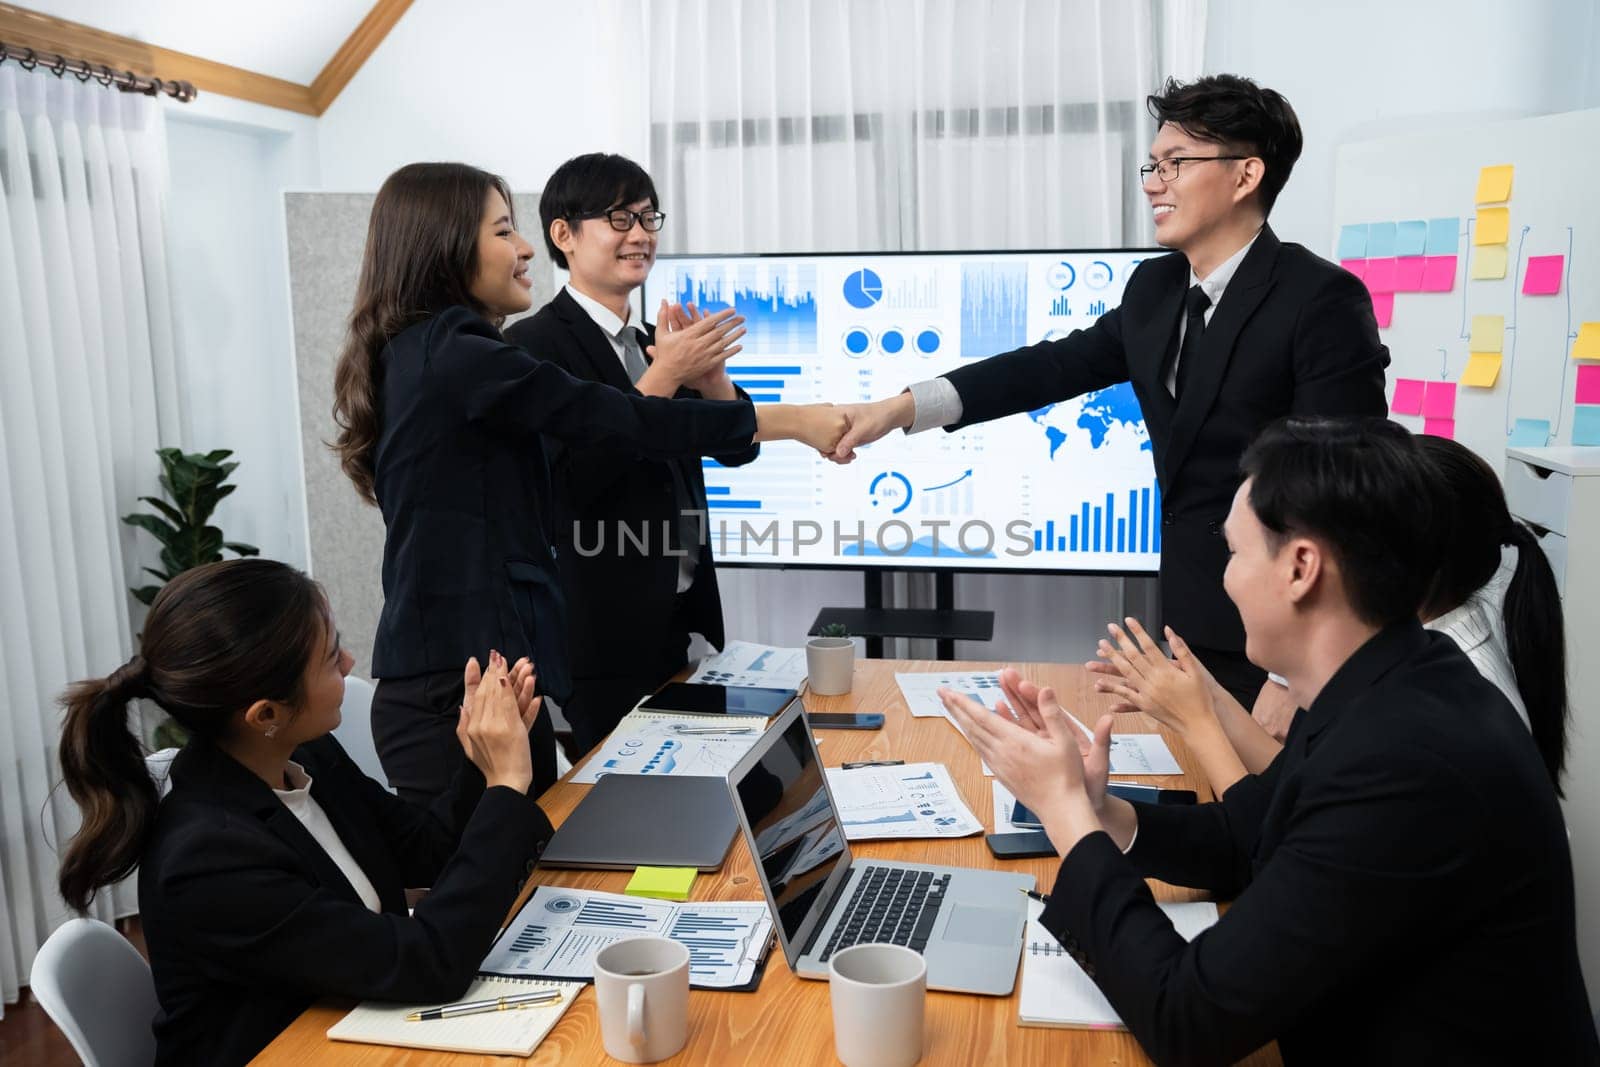 Businesspeople shake hand after successful agreement or meeting. Office worker colleague handshake with business team leader manager for strong teamwork in office to promote harmony and unity concept.